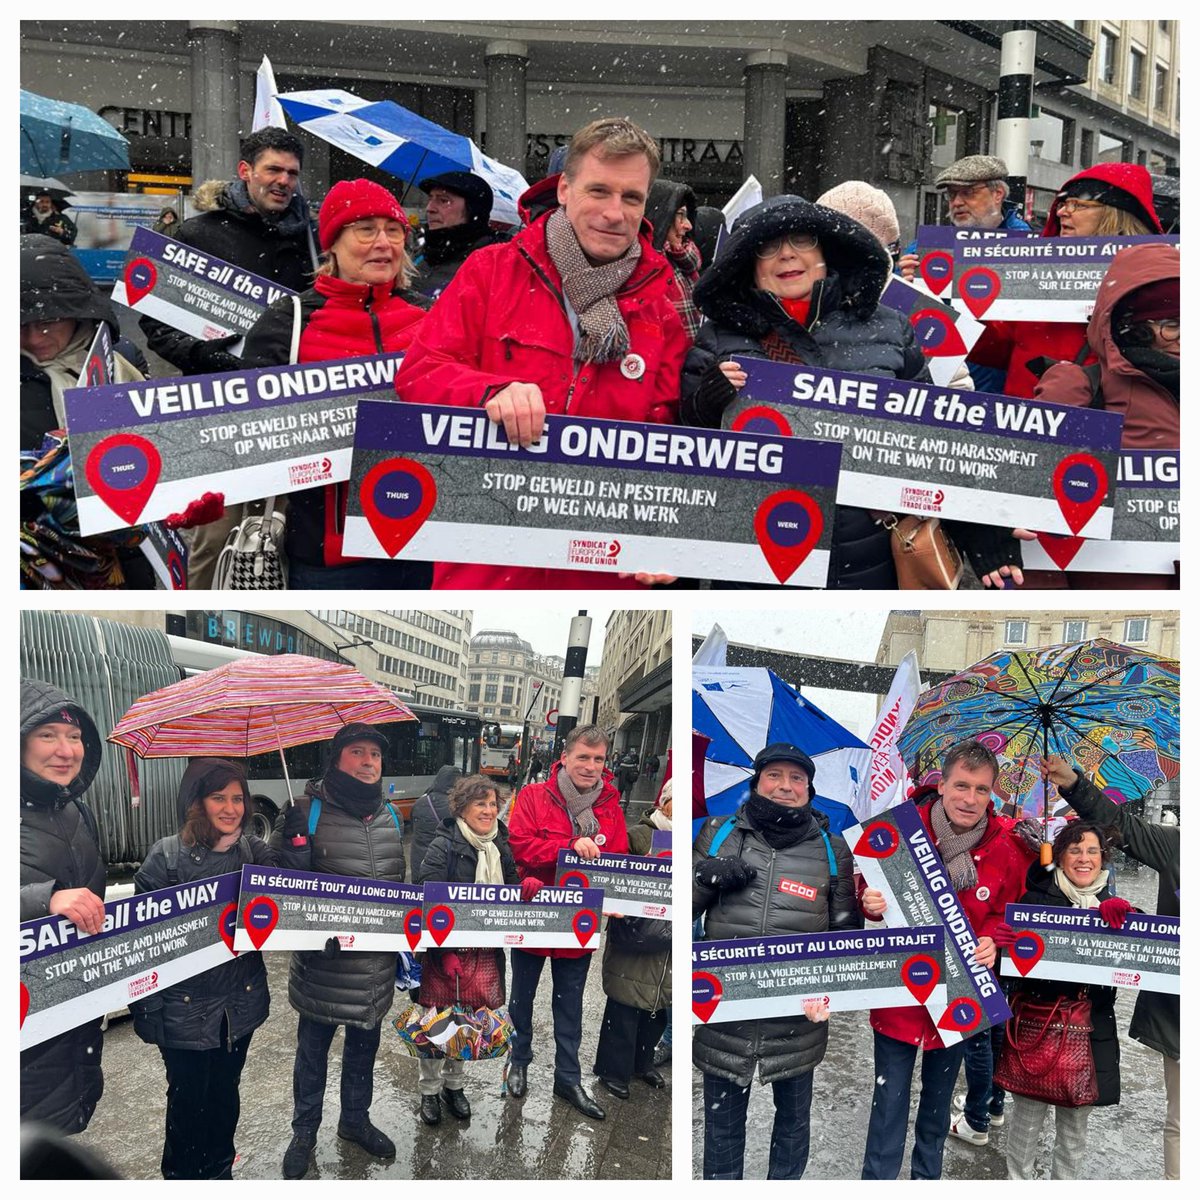 #SafeAllTheWay
Members of @WorkersEESC together at @etuc_ces street action to stop violence and harassment at work. All EU member states must ratify #ILO convention 190!
#InternationalWomensDay2023